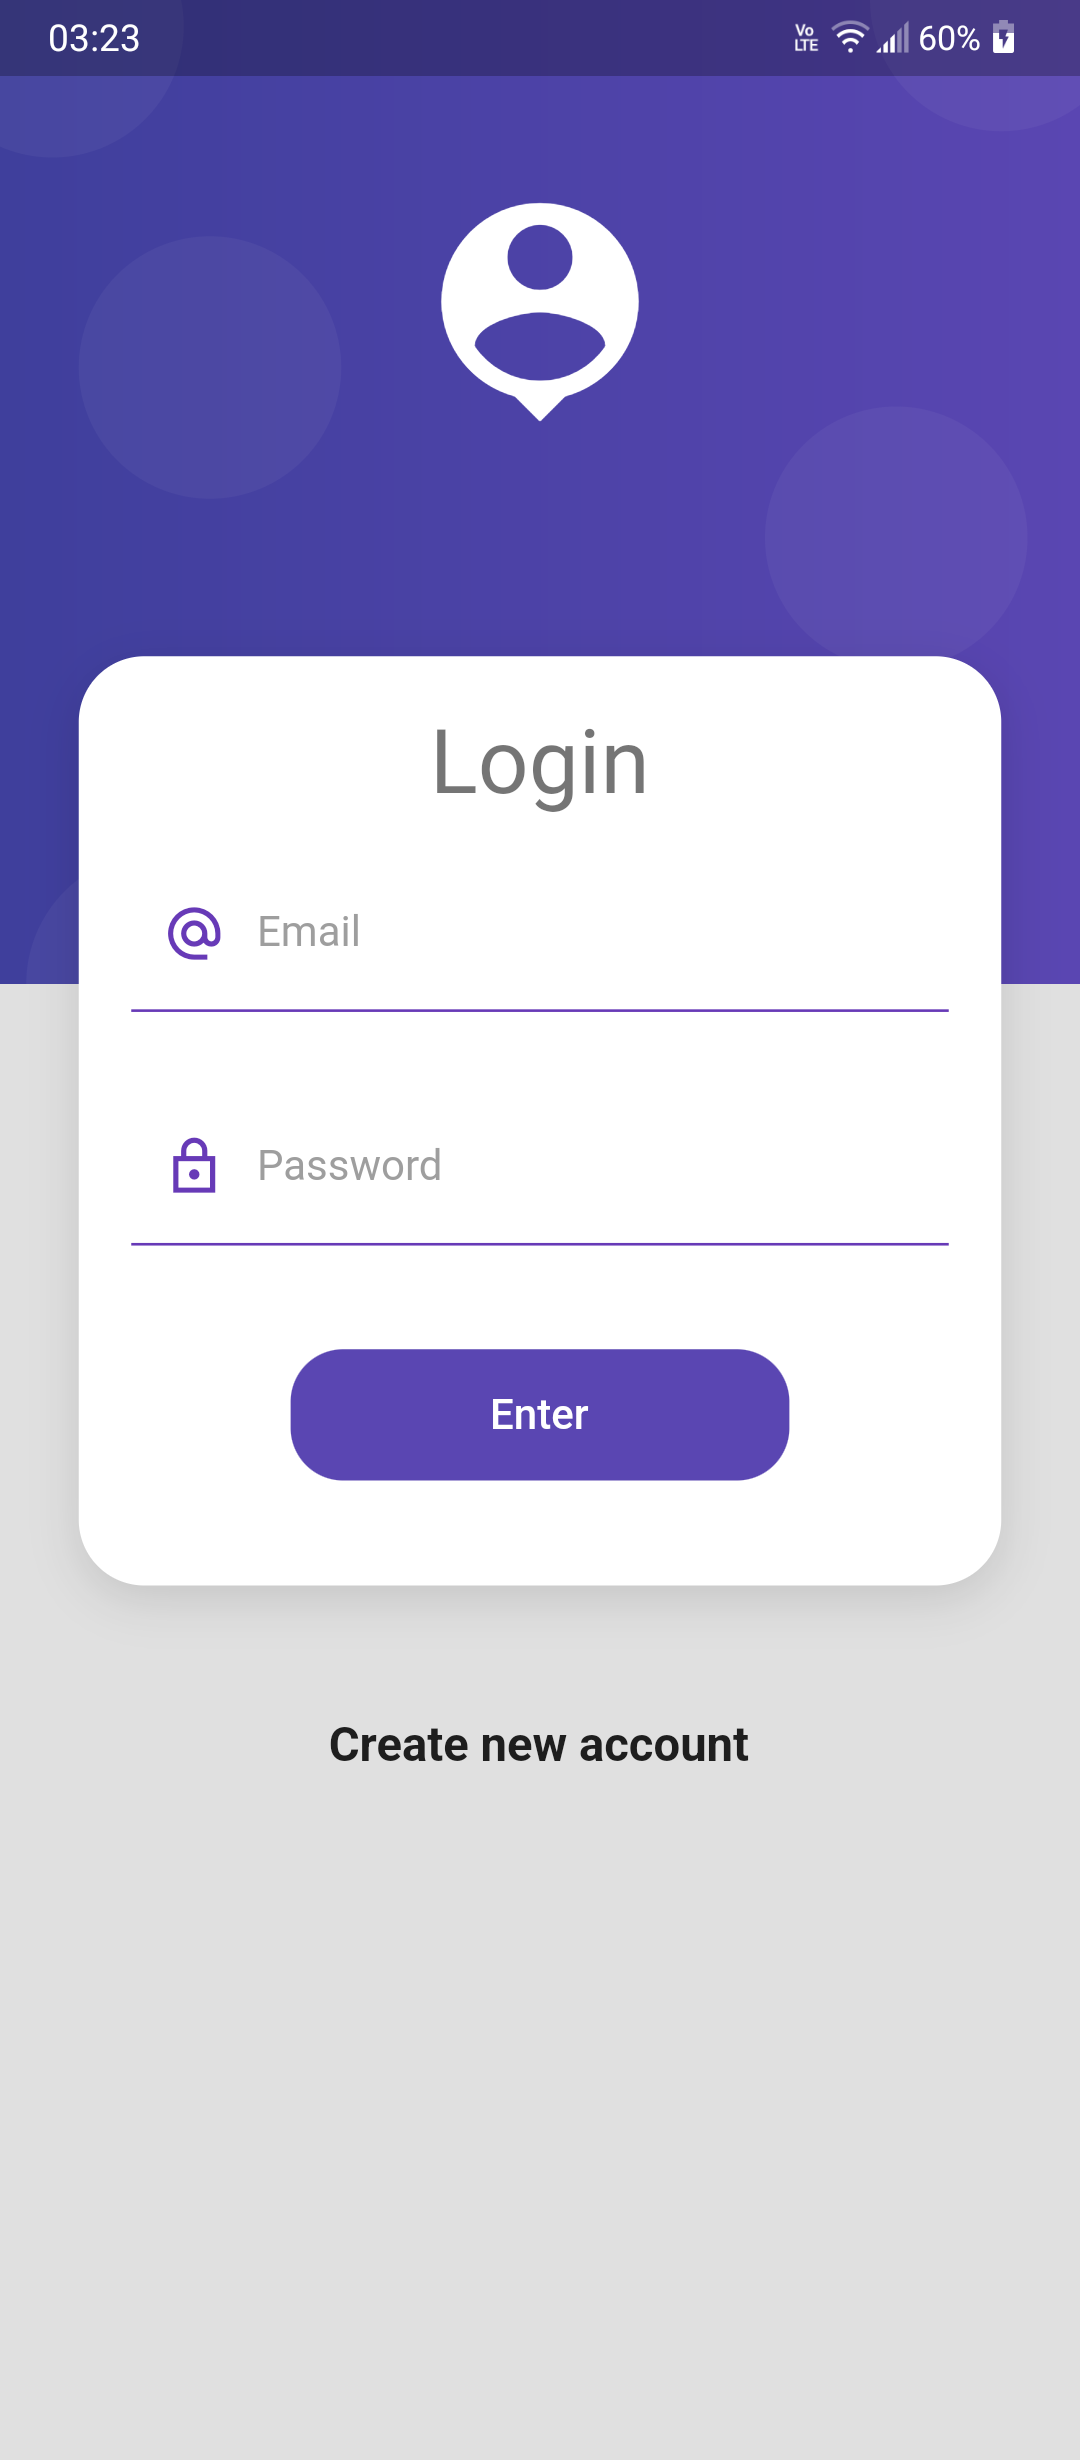 Flutter application that implements a complete login screen with fields validations